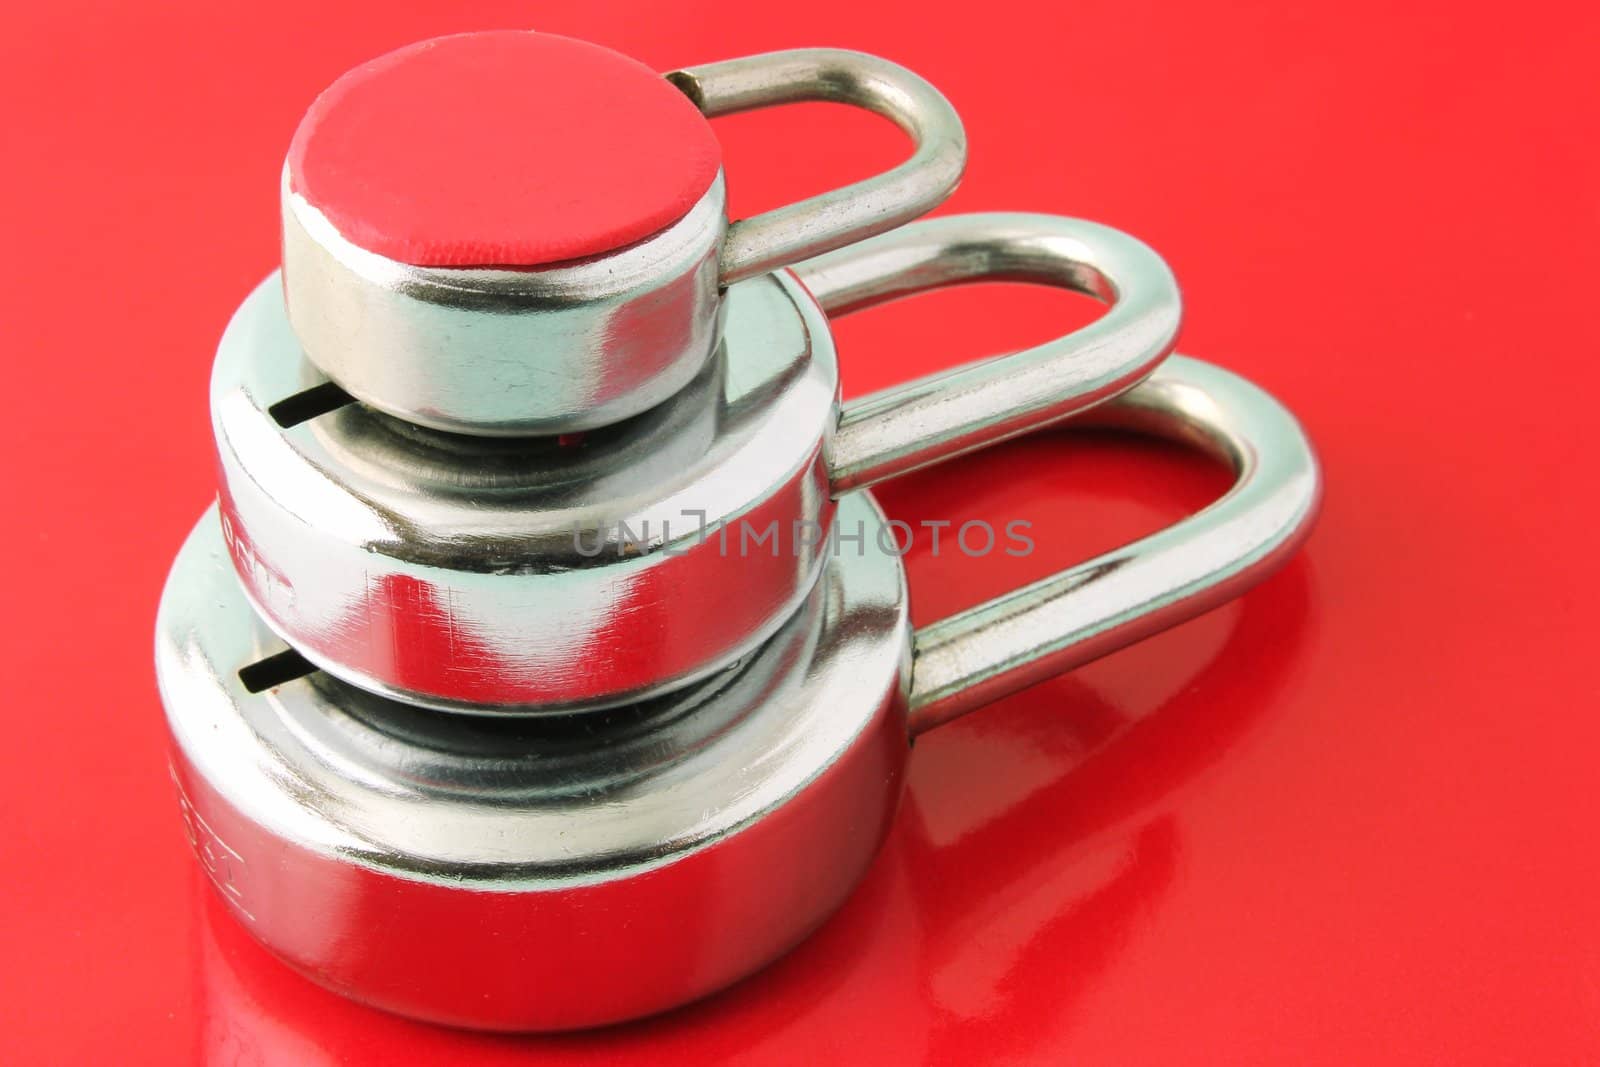 Three layers of security depicted with three padlocks on a red background